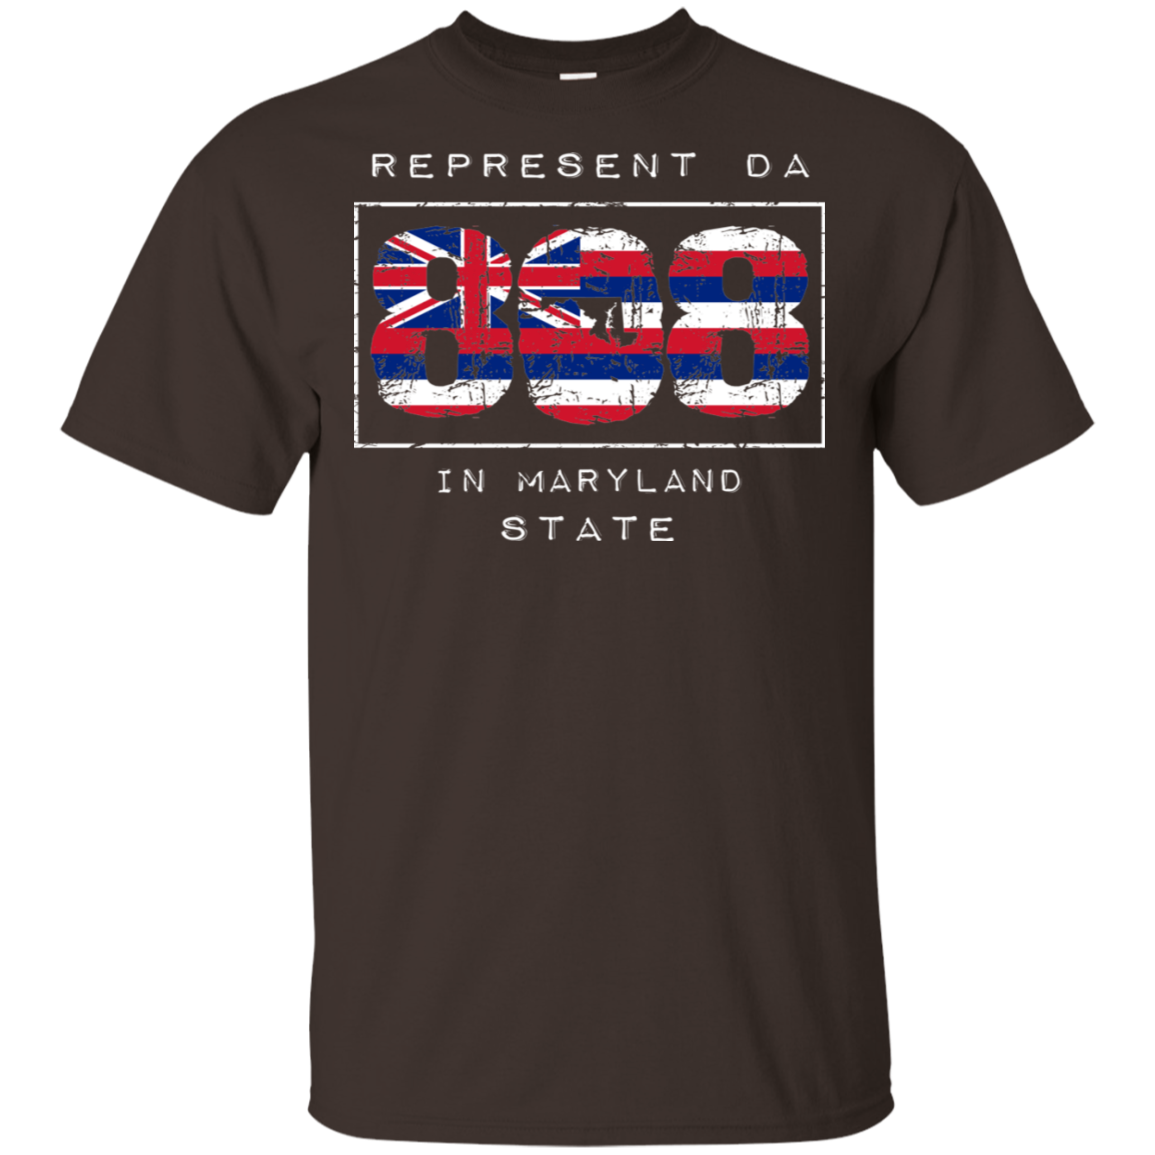 Rep Da 808 In Maryland State Ultra Cotton T-Shirt, T-Shirts, Hawaii Nei All Day